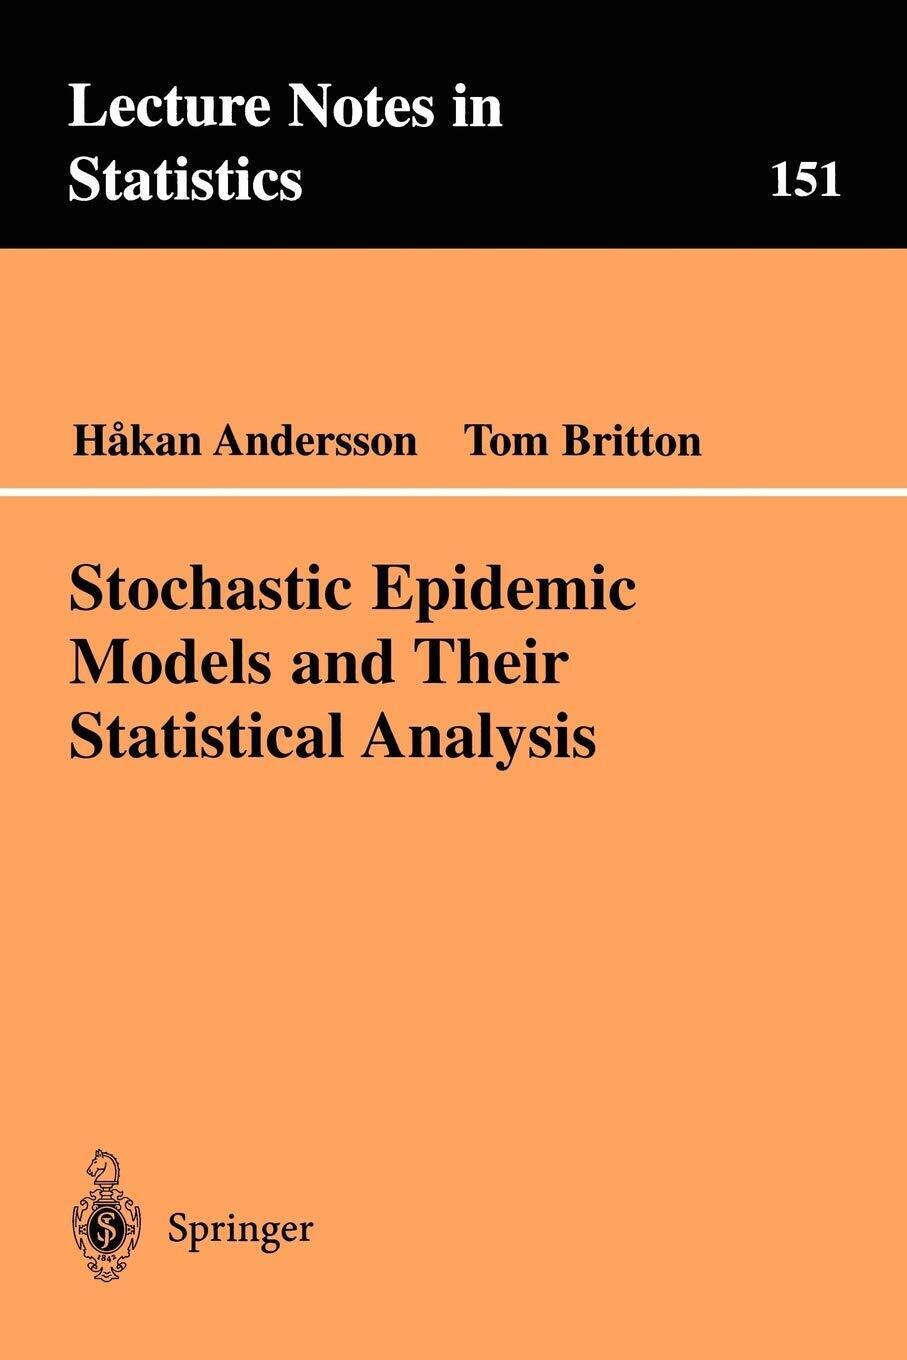 Stochastic Epidemic Models and Their Statistical Analysis - Hakan Andersson-2013